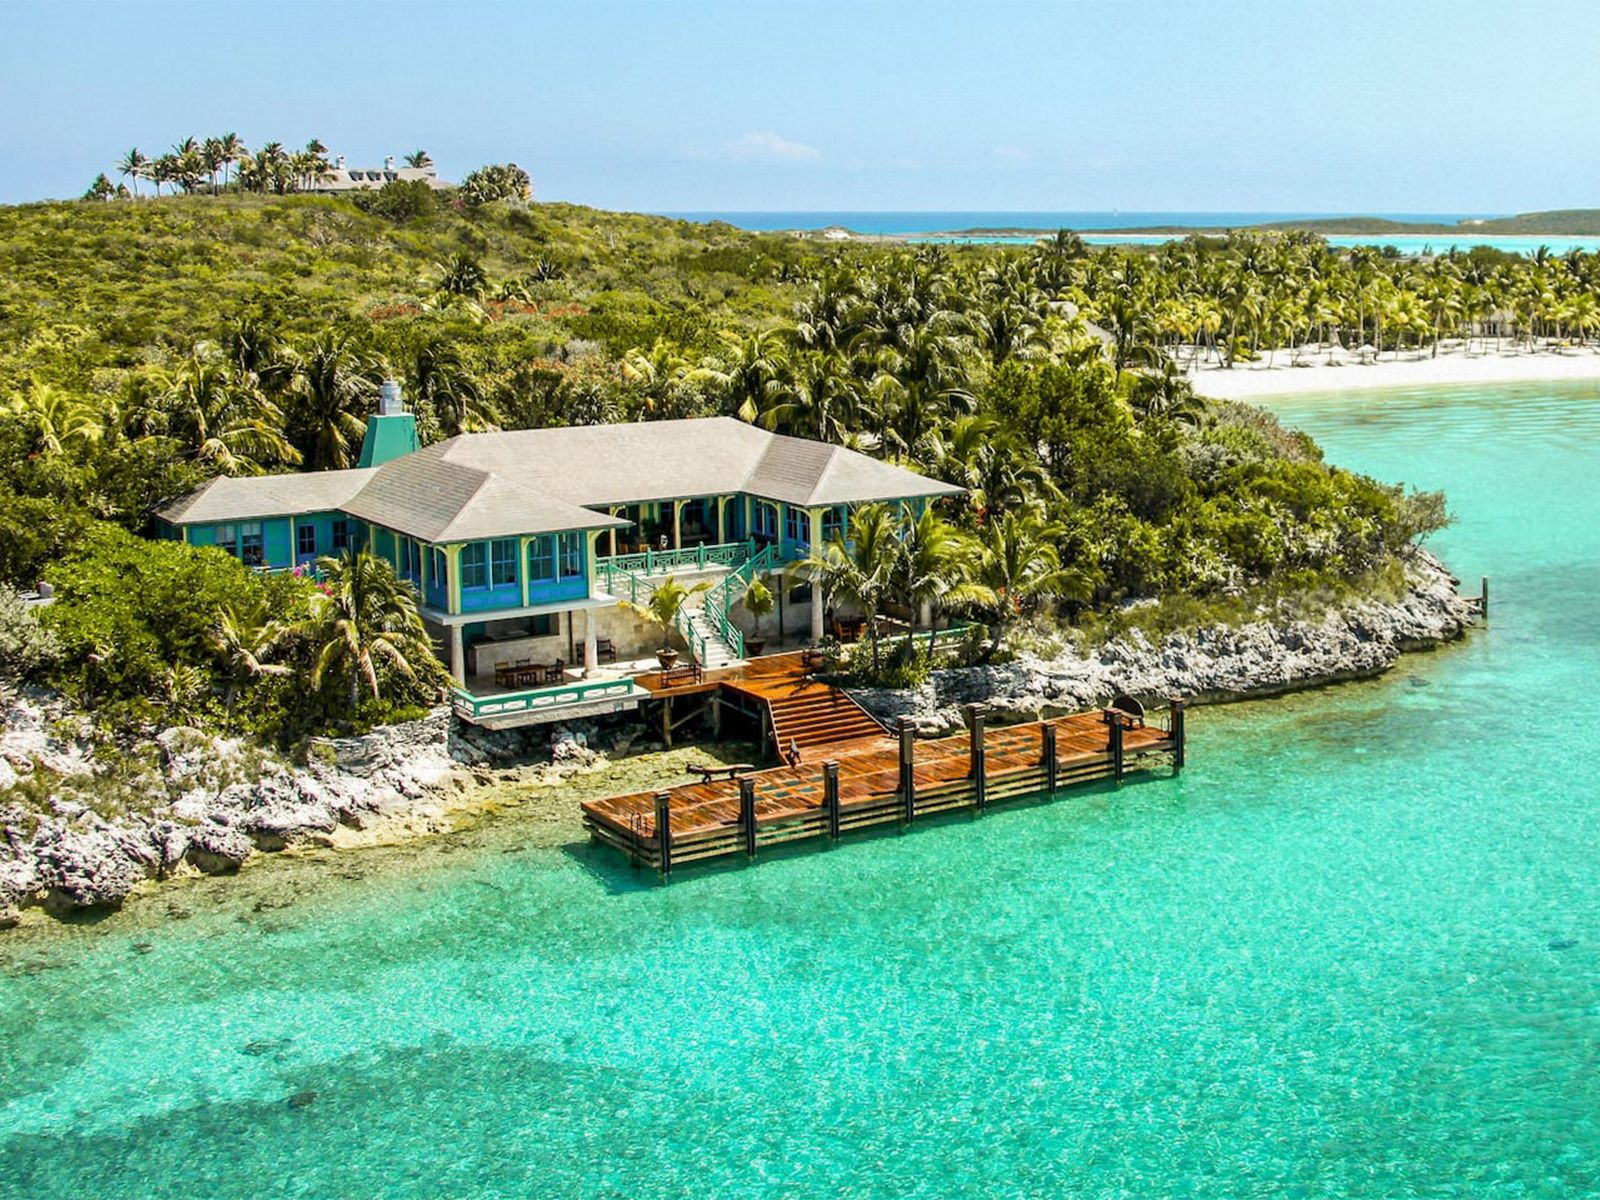 This is the world’s most expensive Airbnb